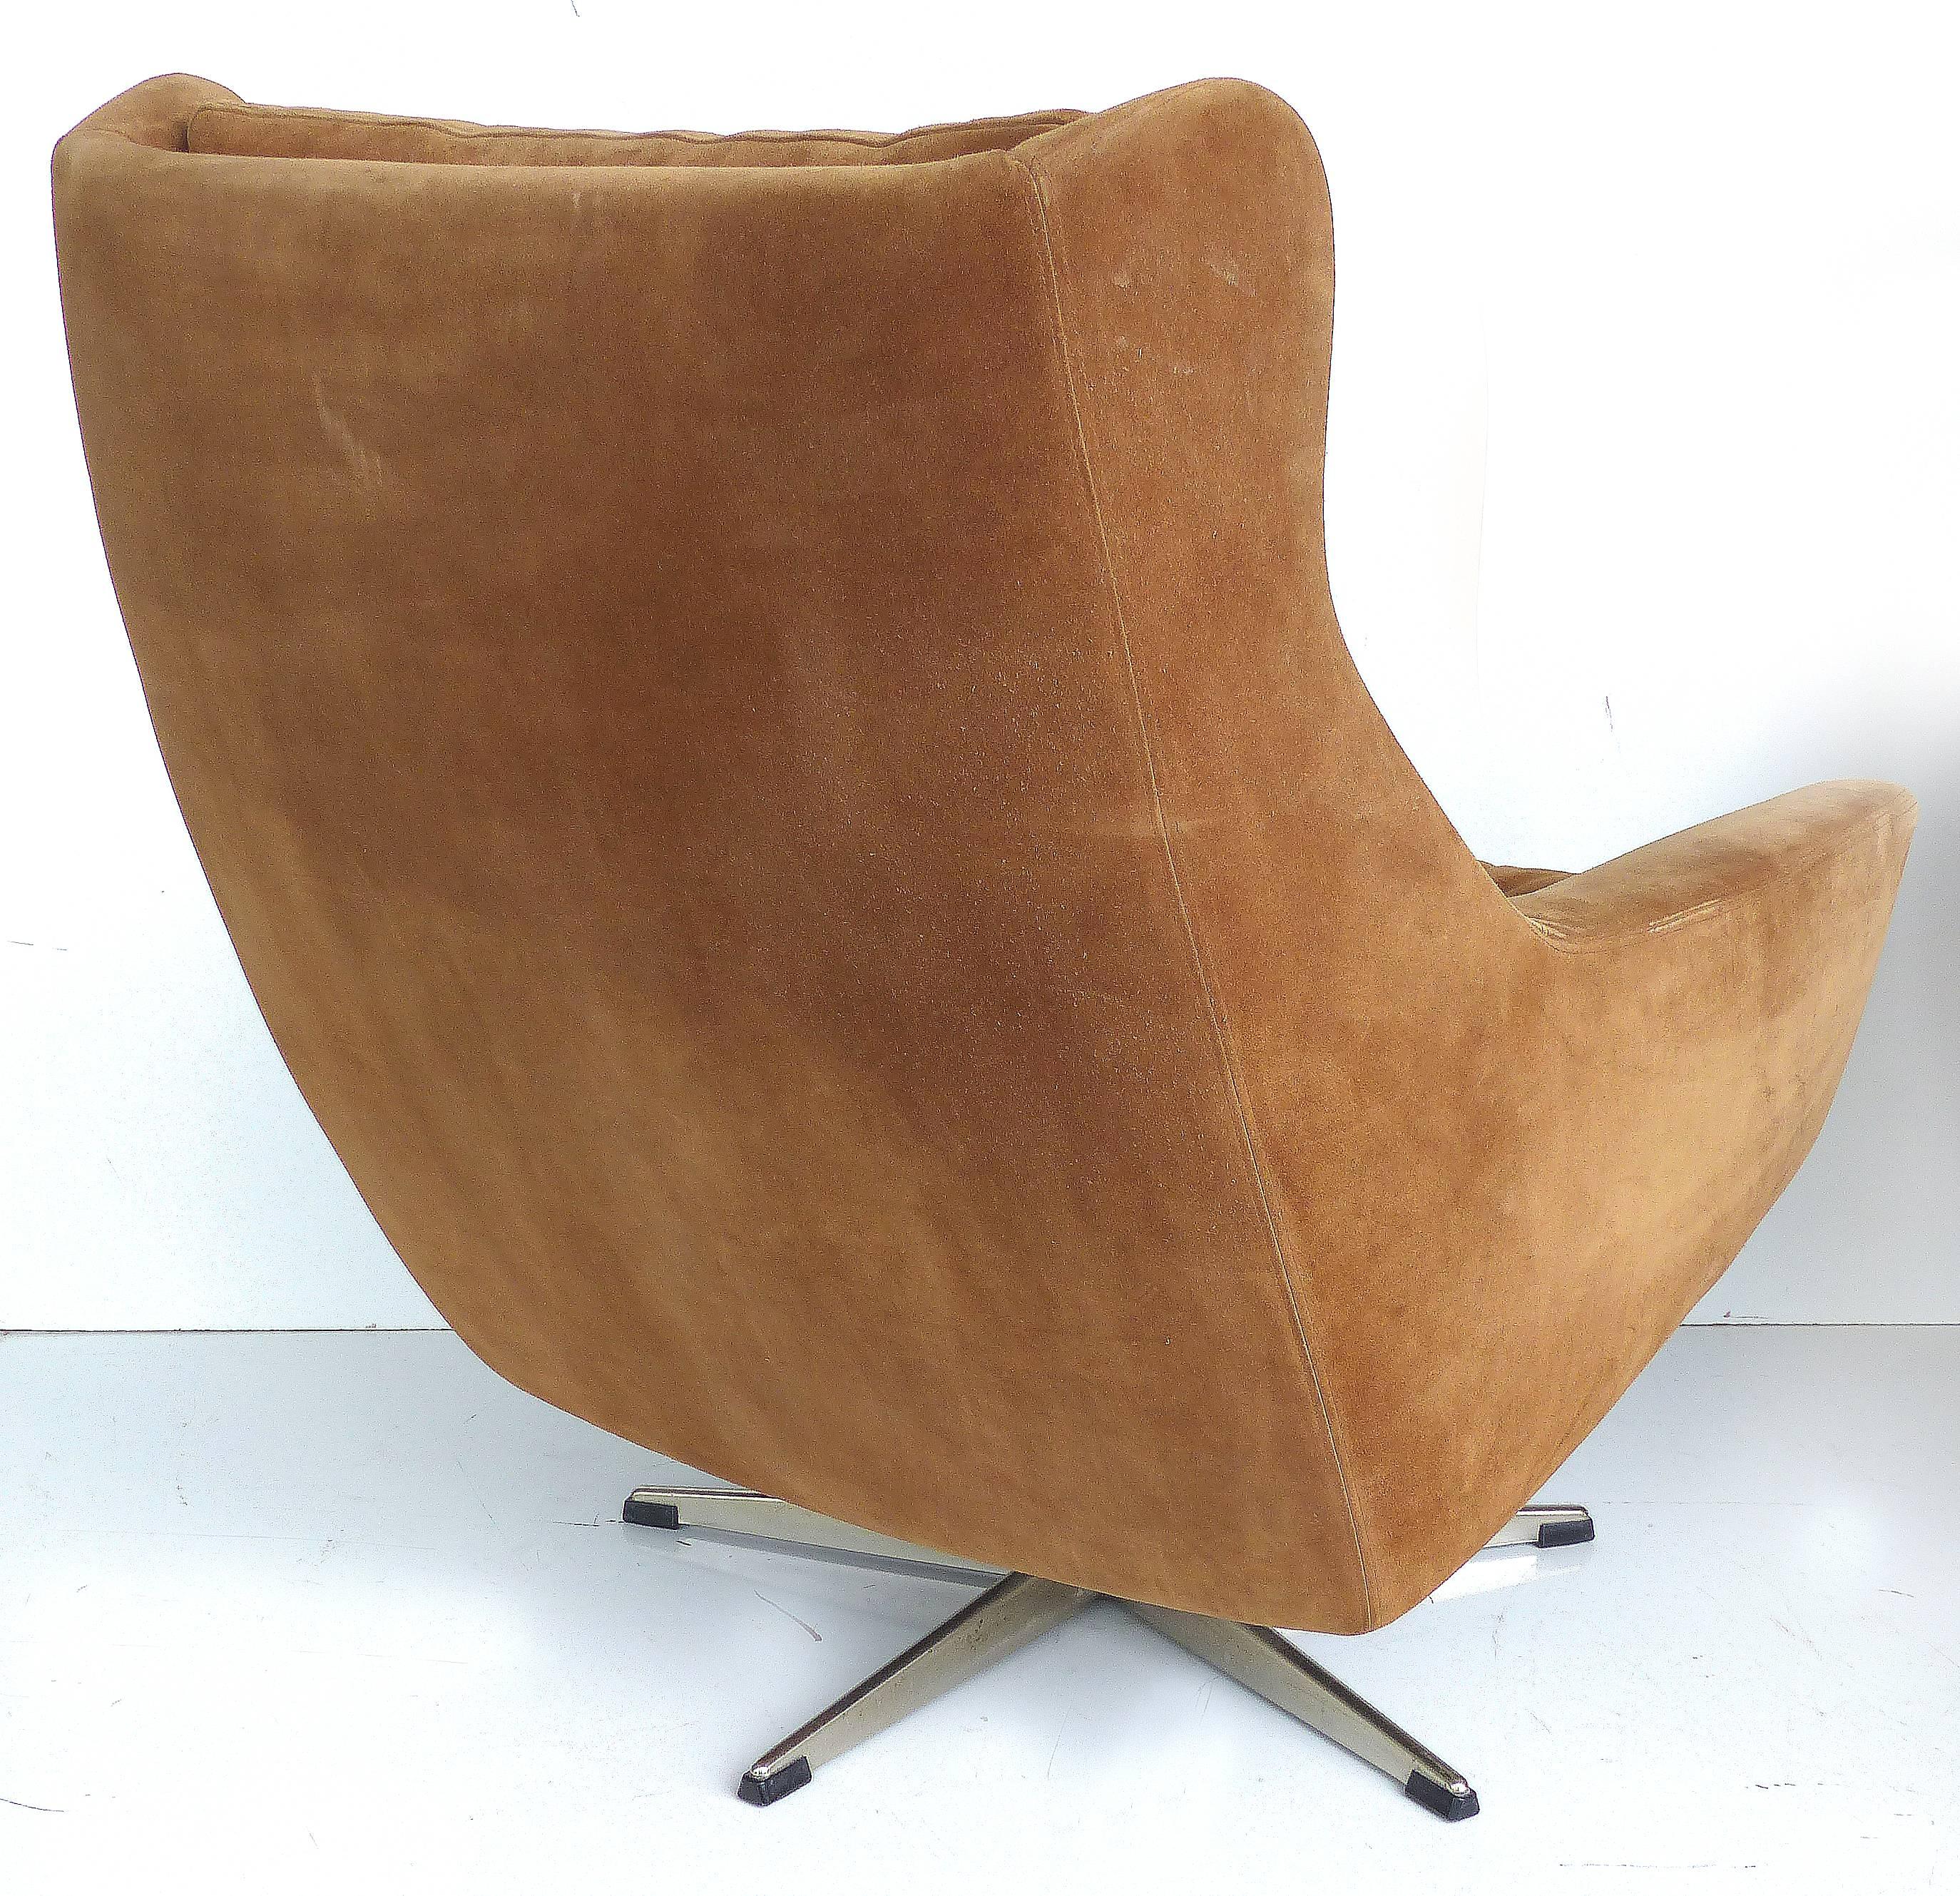 Danish Mid-Century Suede Swivel Chair with Ottomans from John Stuart 1